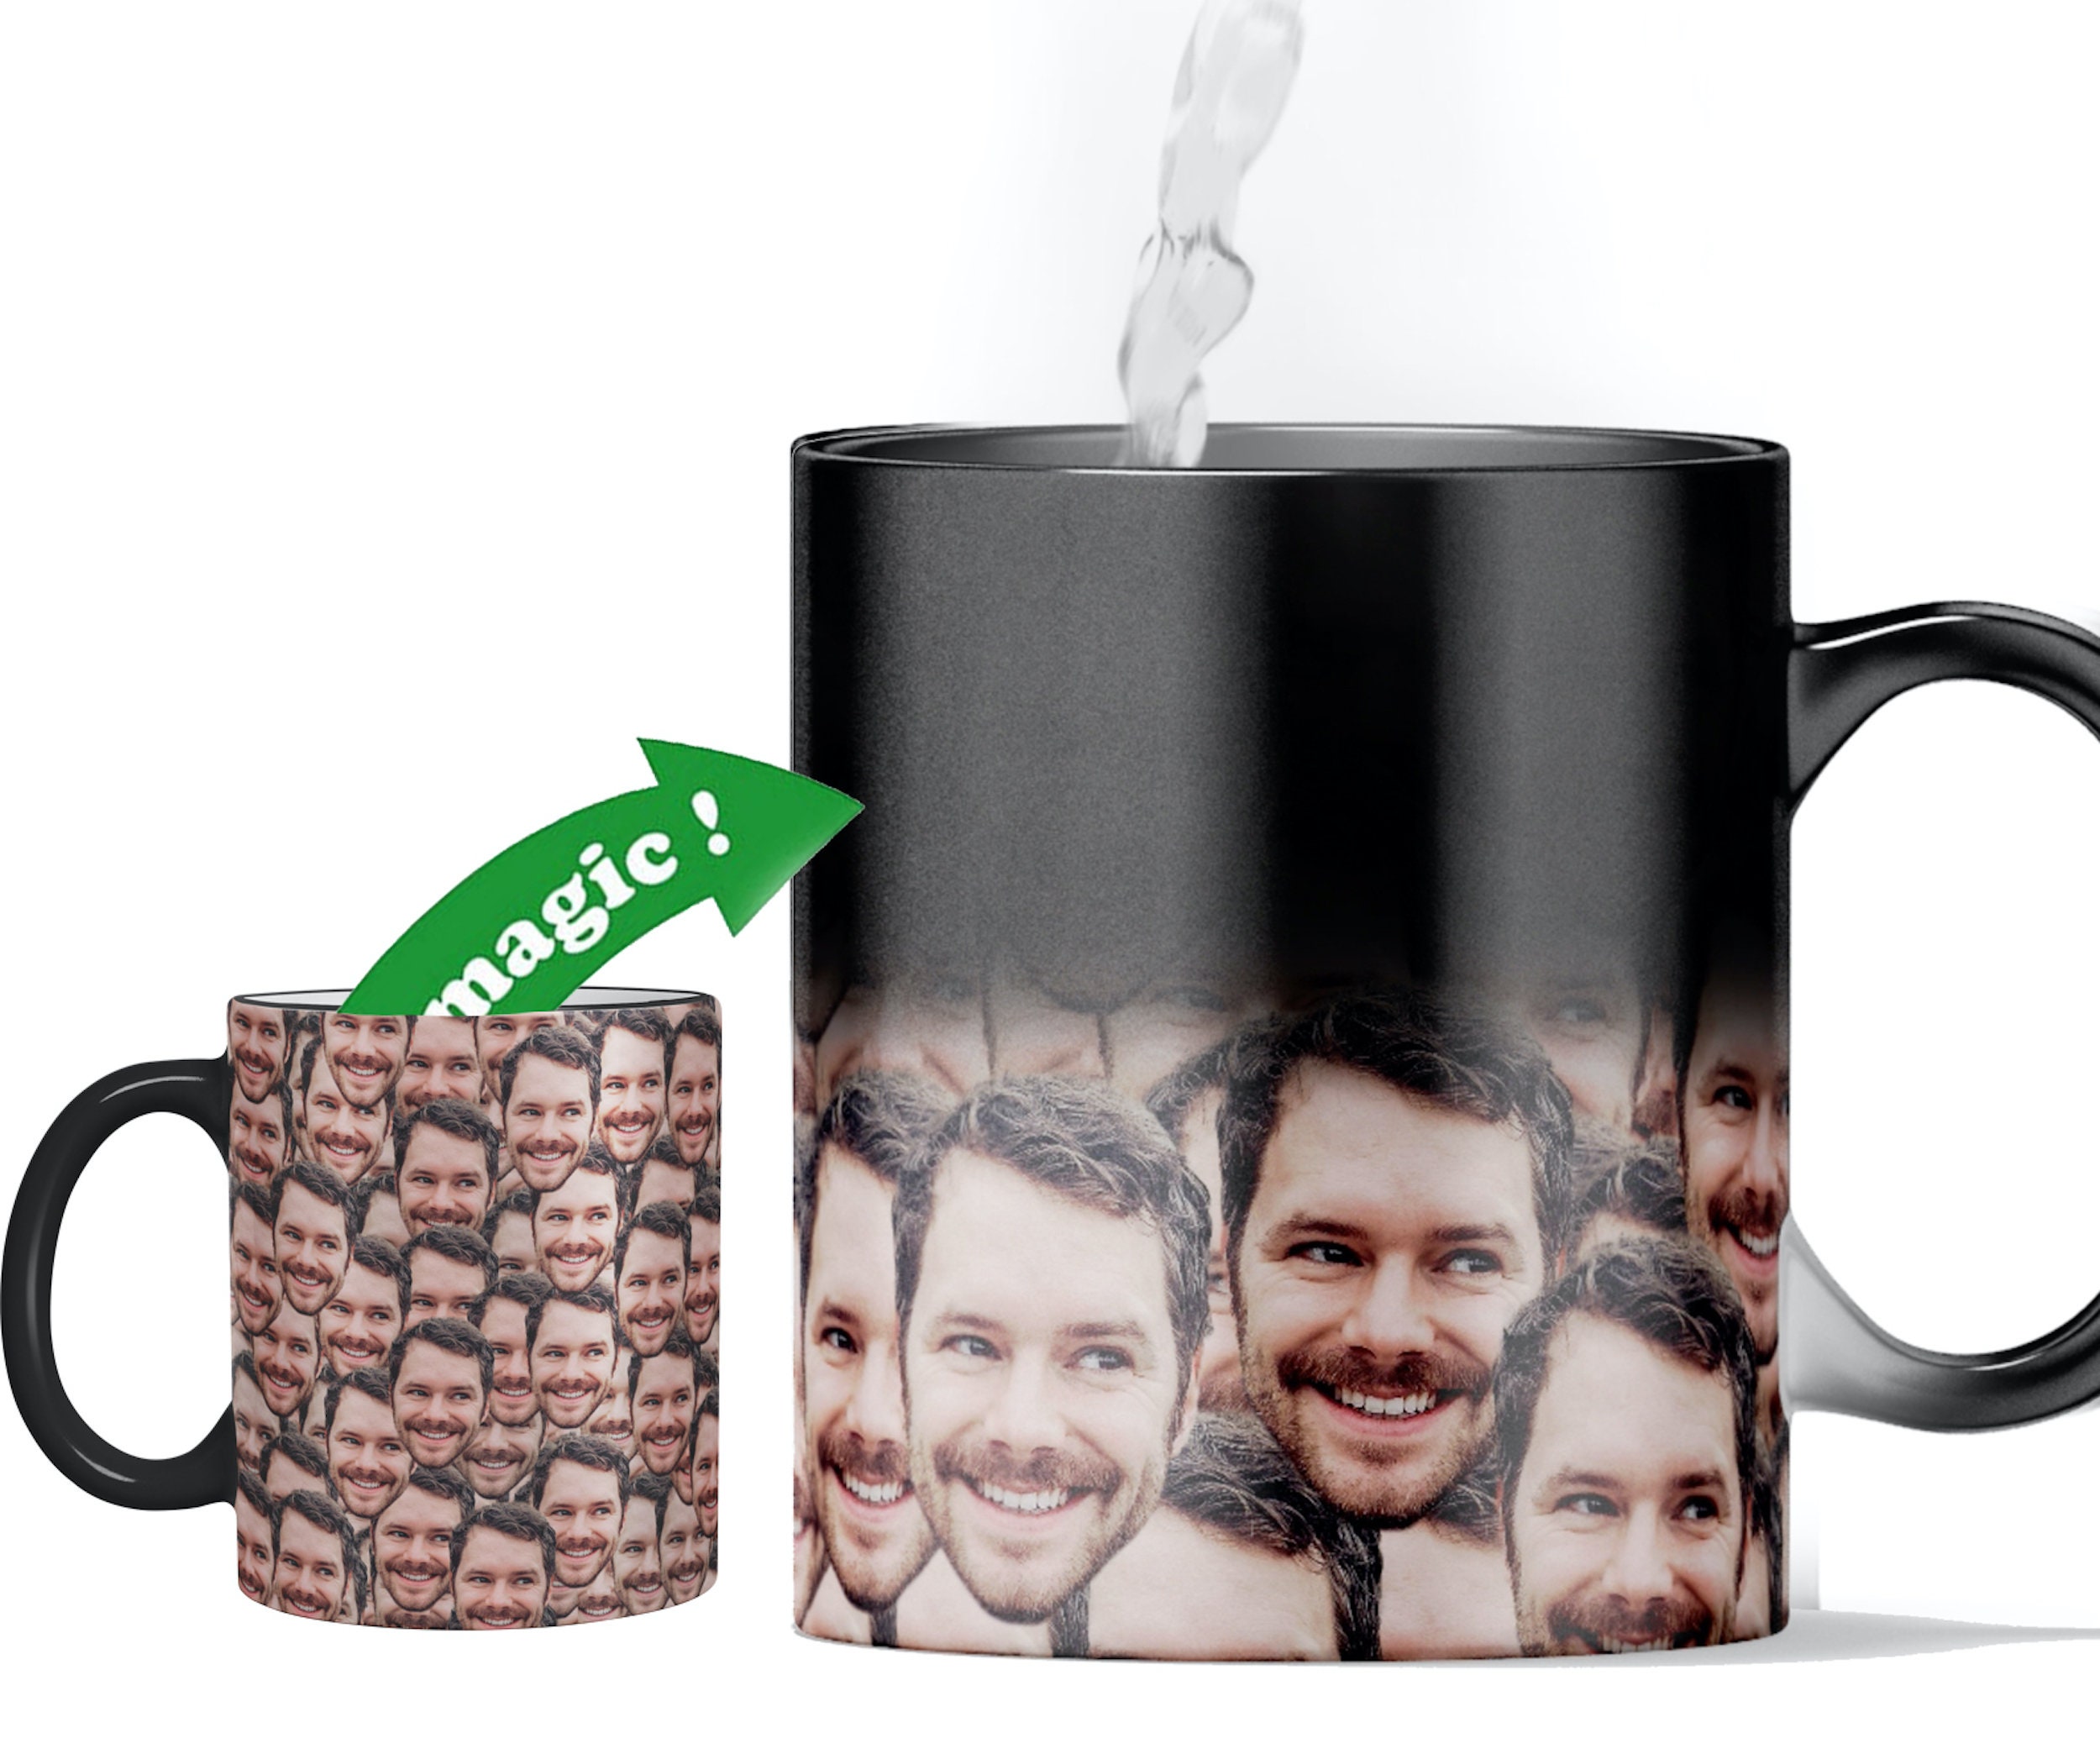 17 Heat-Changing Mugs for Every Coffee-Addicted Person